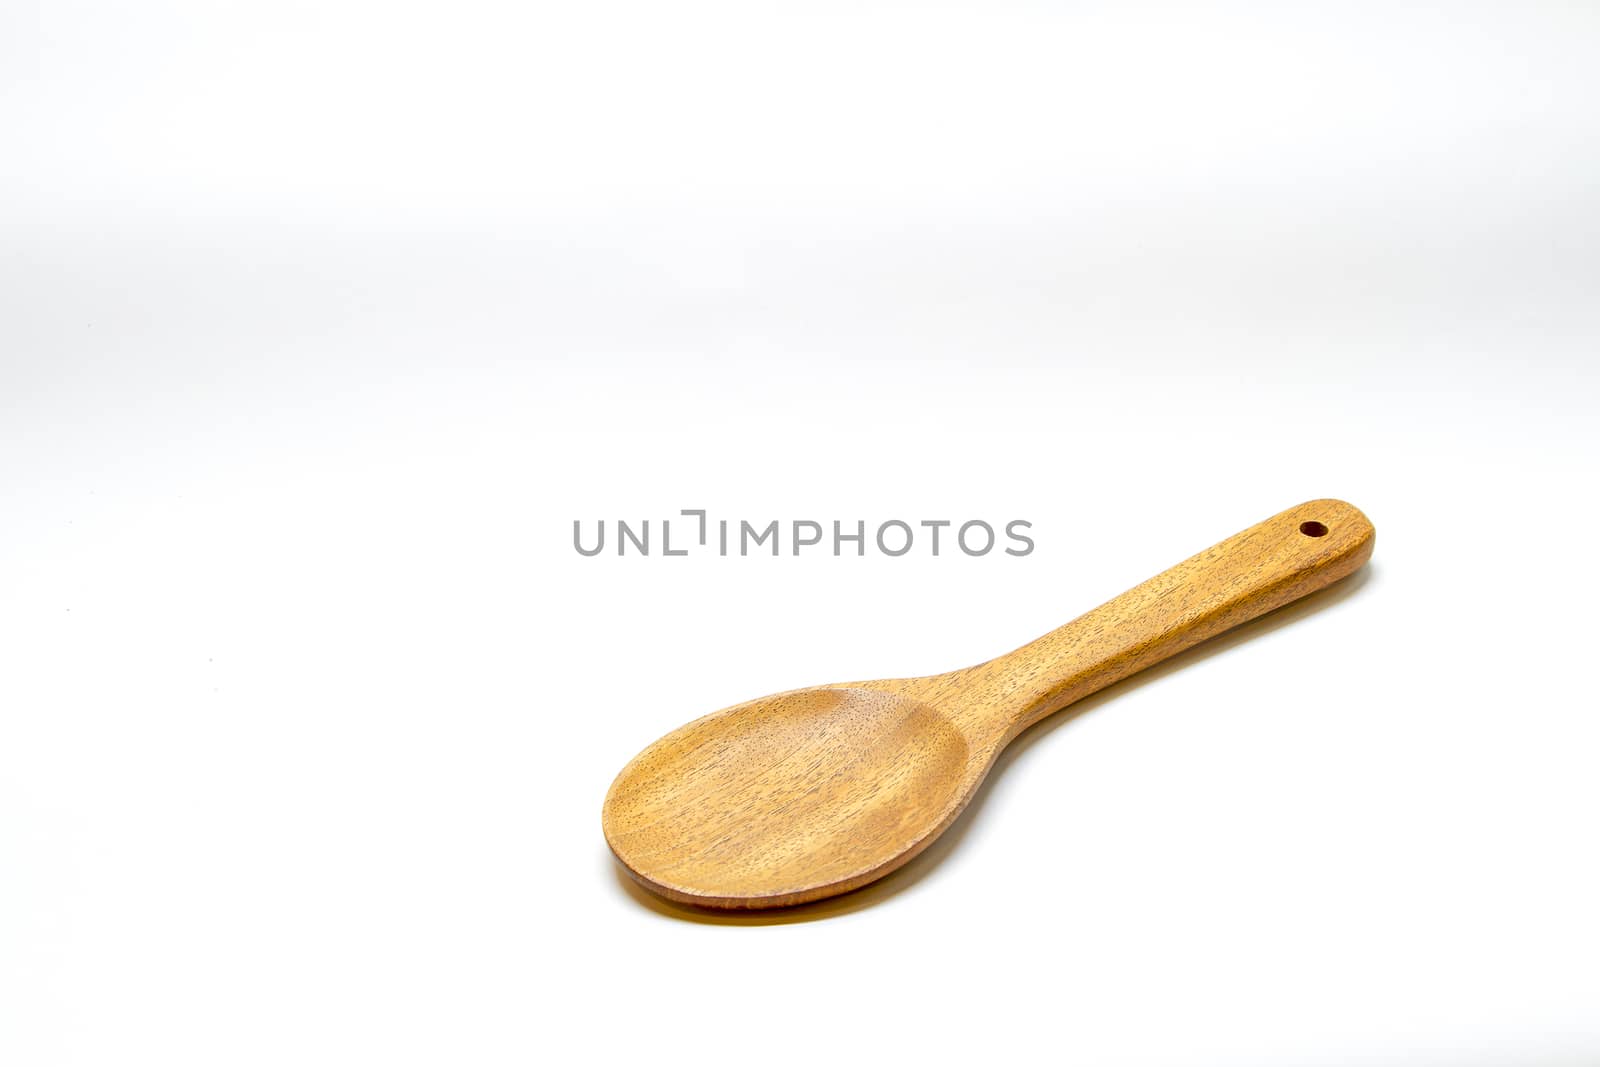 Brown wooden spoon on white background by TakerWalker